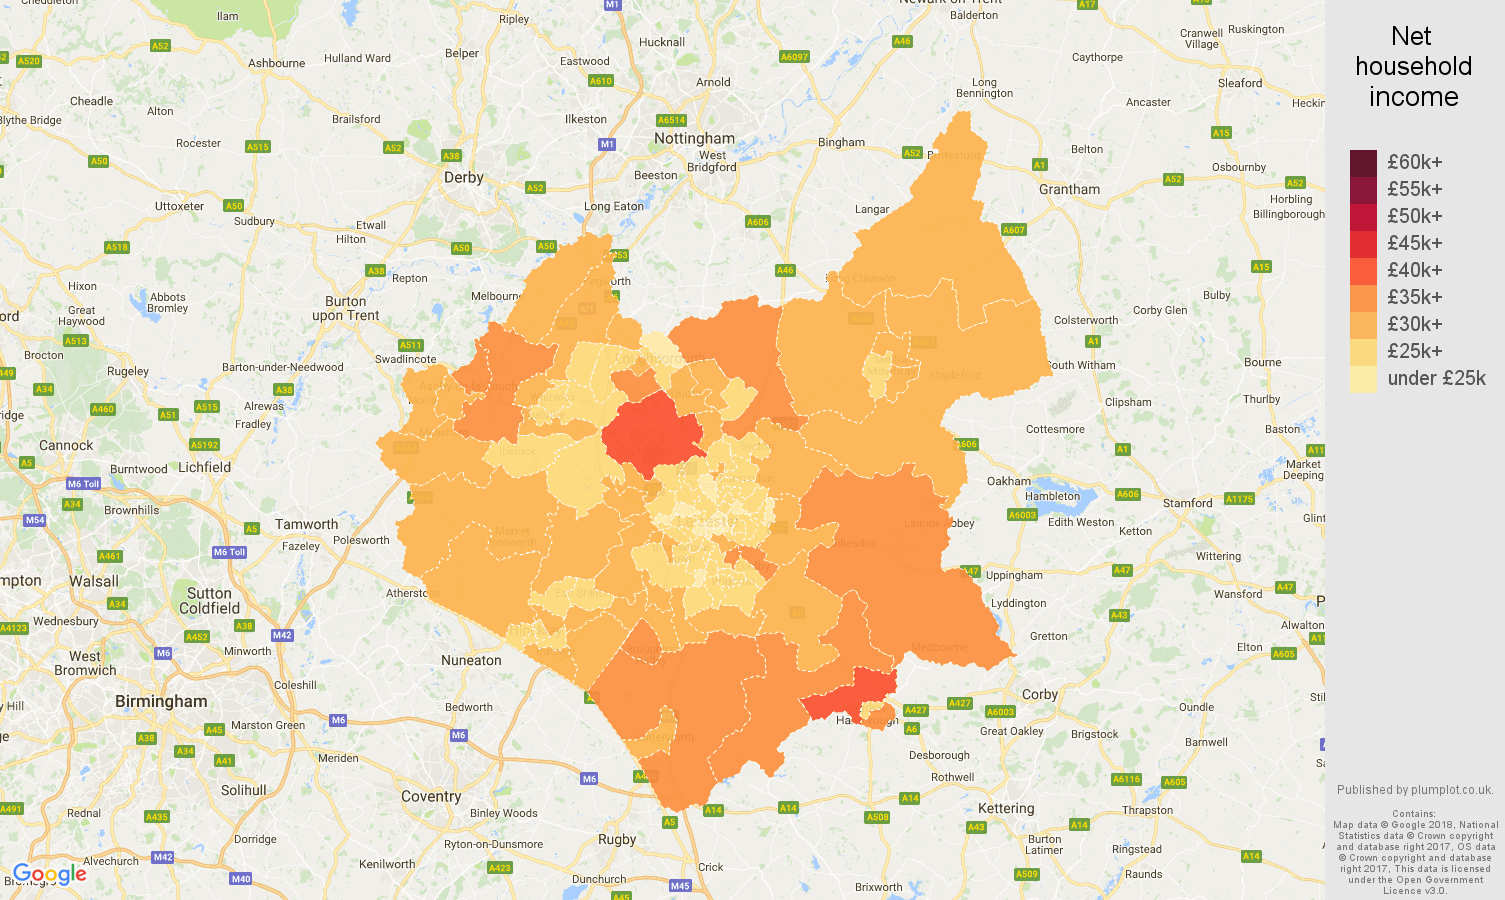 Leicestershire net household income map